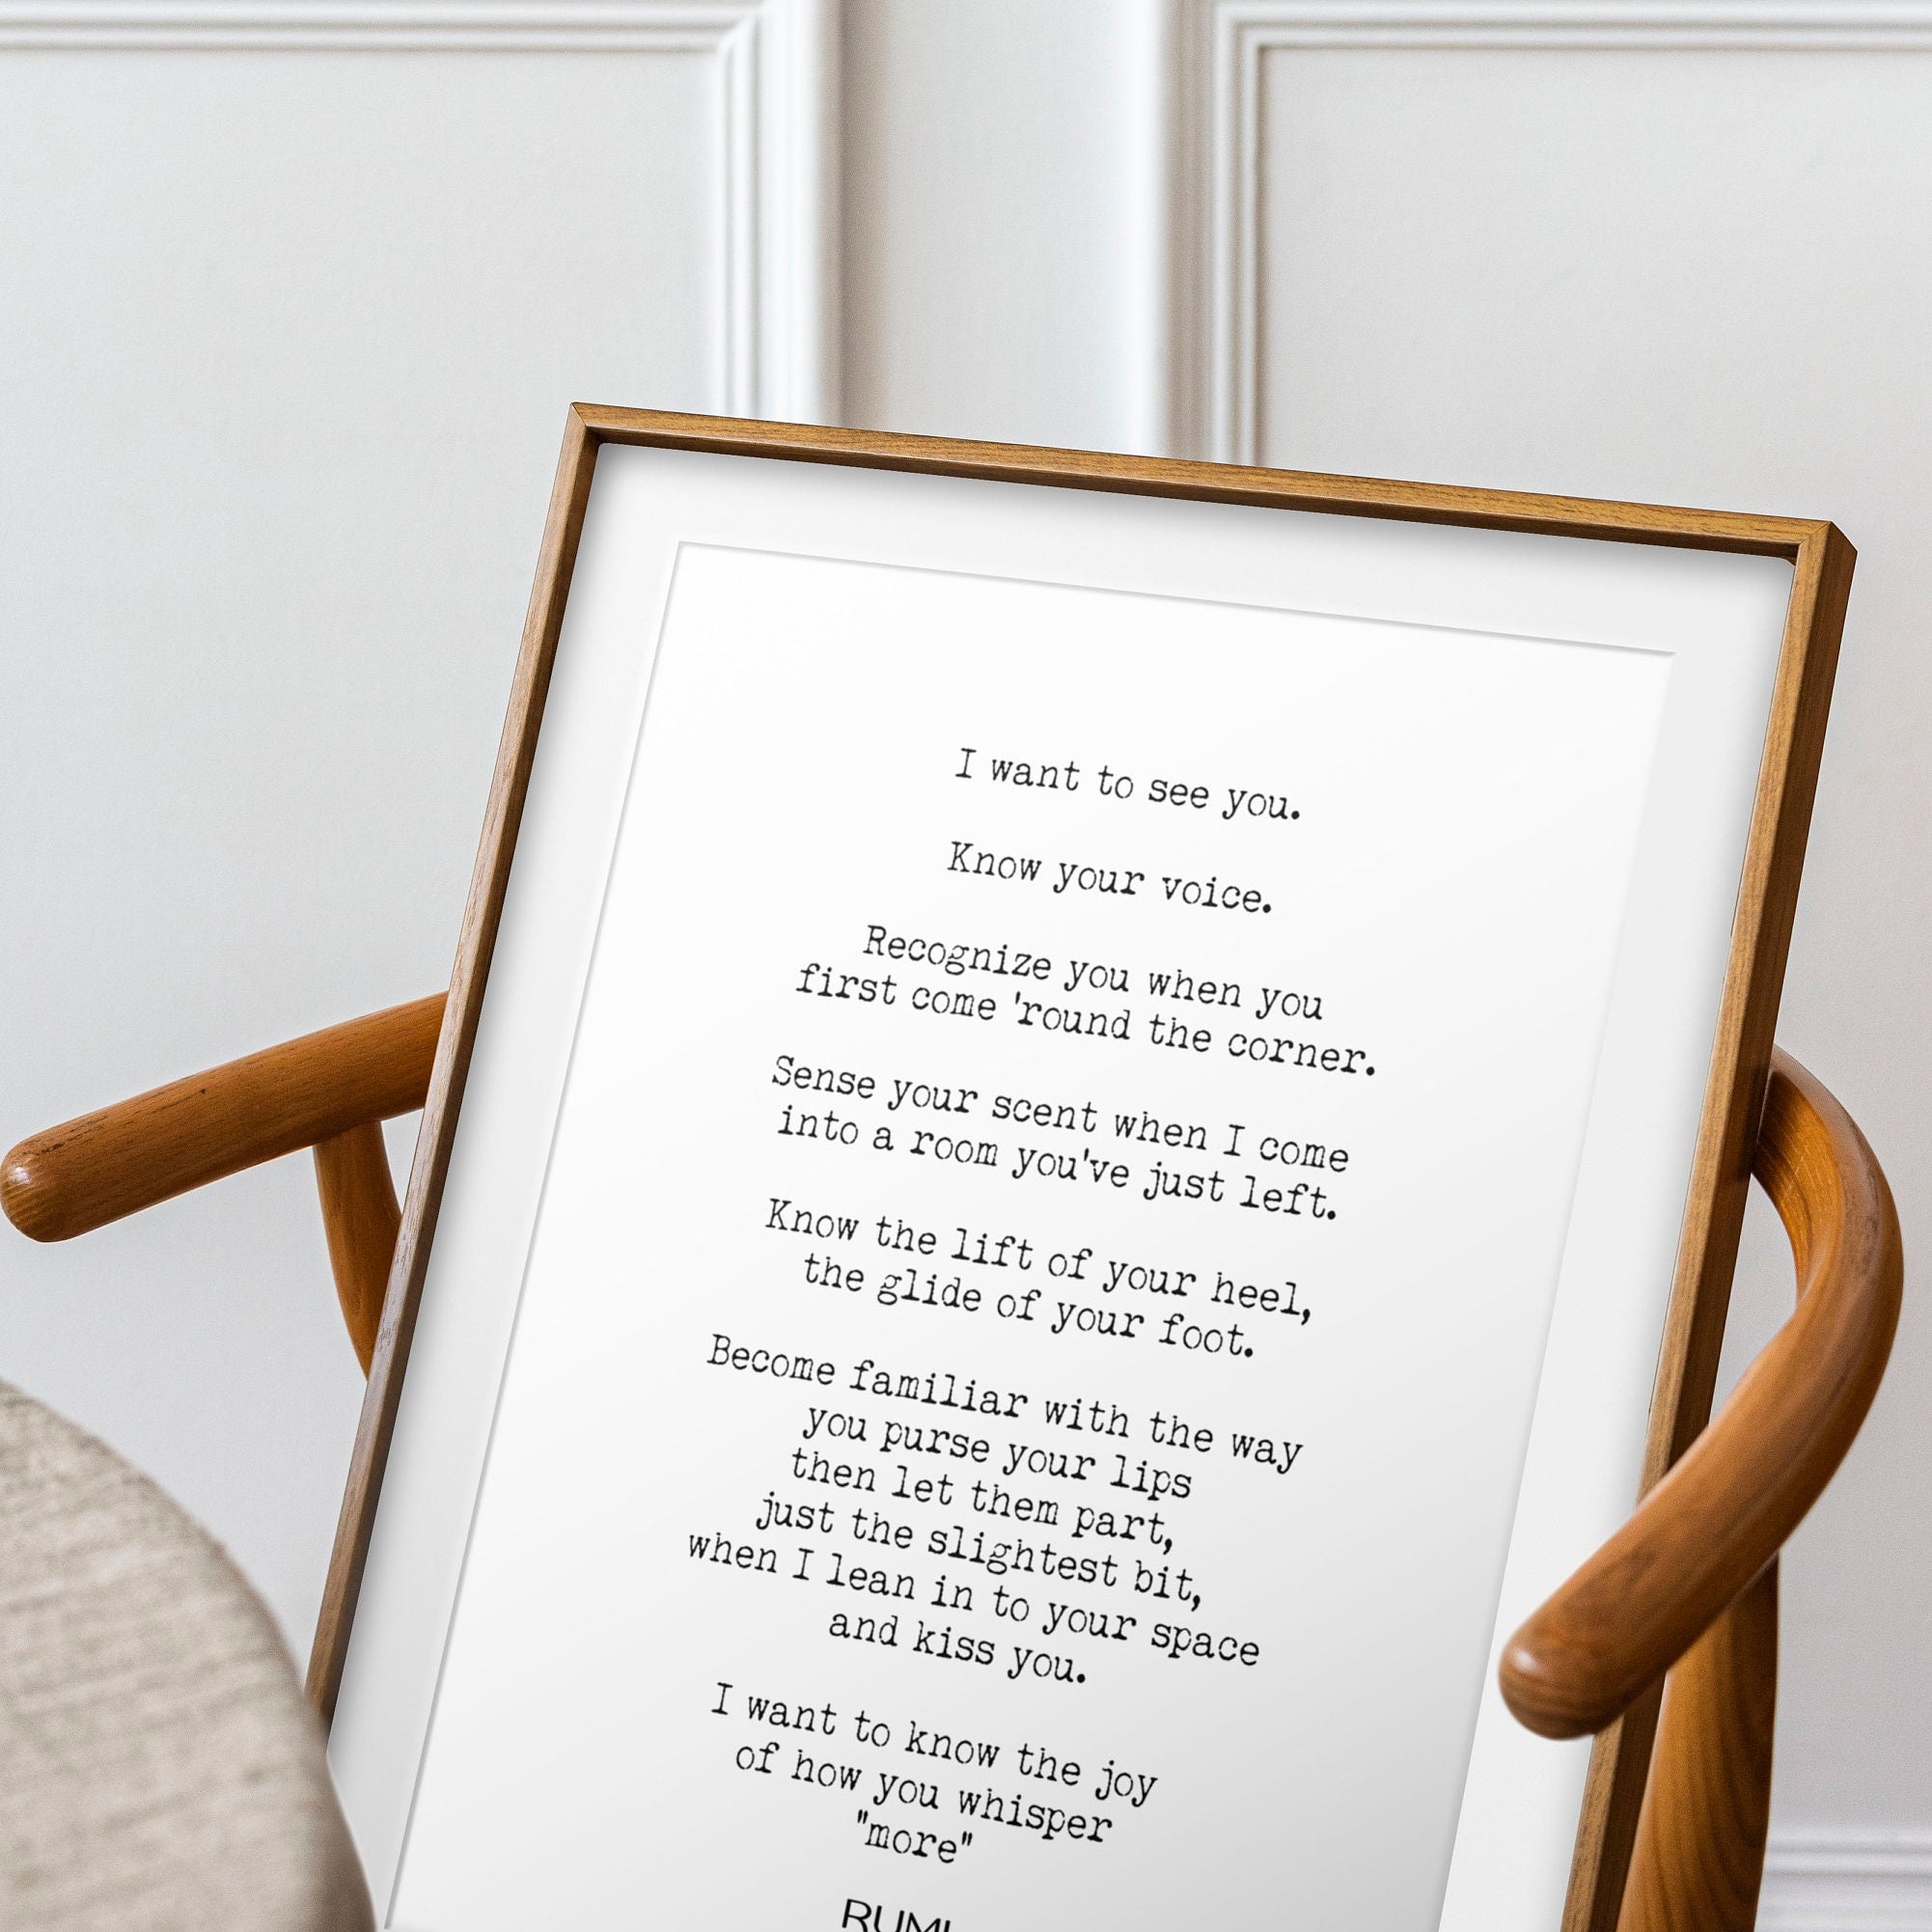 Rumi - I Want To See You Poem Wall Art Prints, Black & White Wall Decor, Romantic Love Poetry Unframed and Framed Art